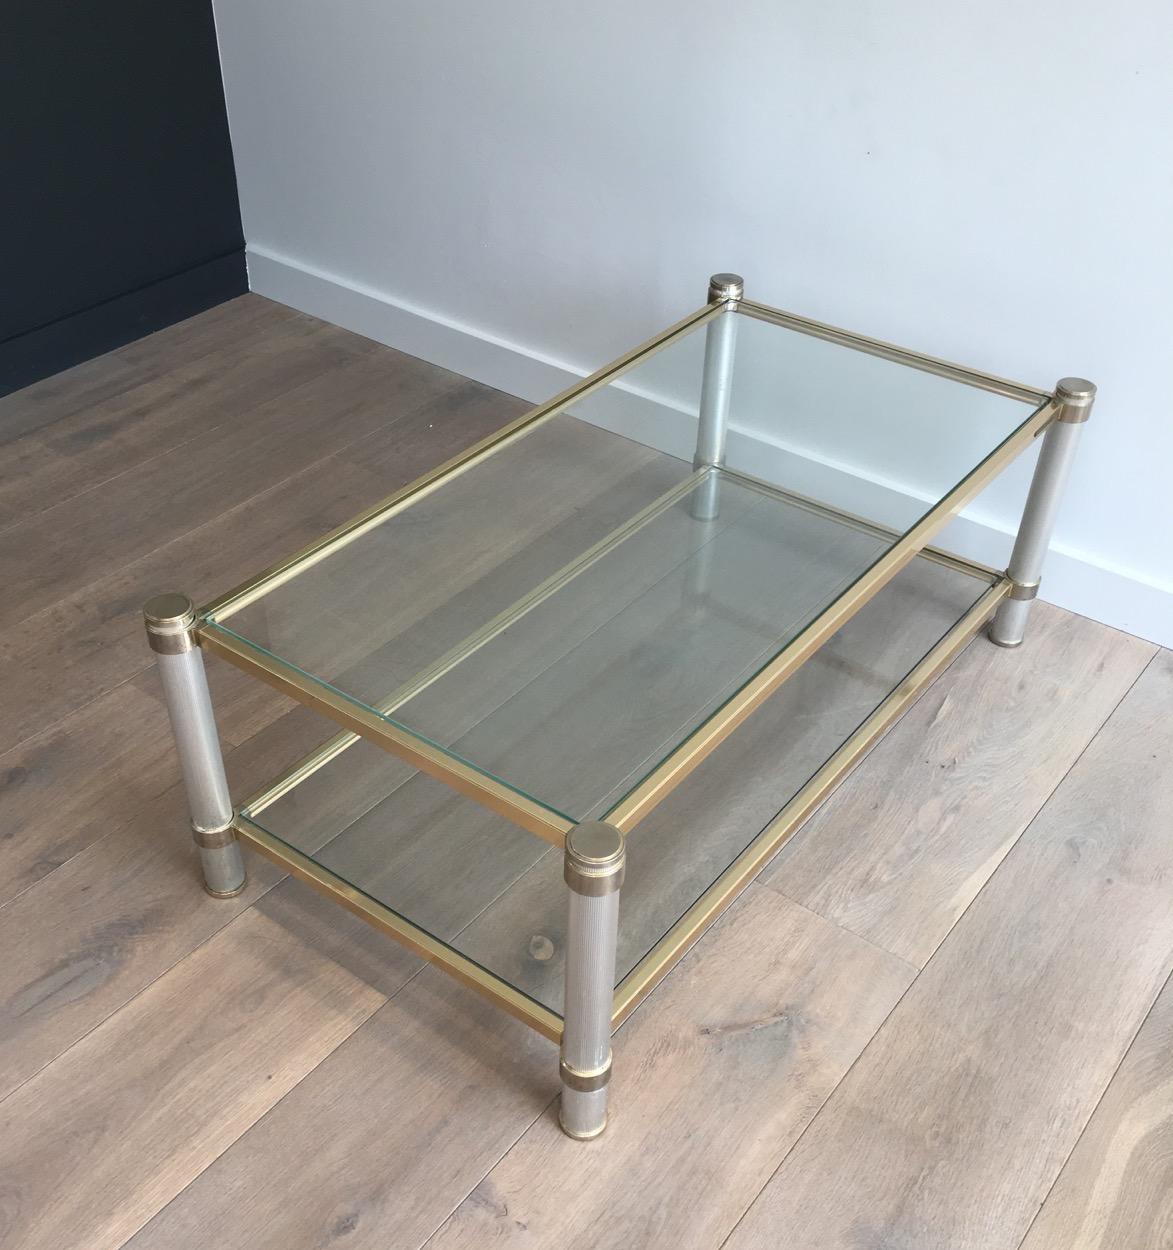  Gold Gilt and Silver Color Aluminium Coffee table with Fluted Legs by P. Vandel For Sale 4